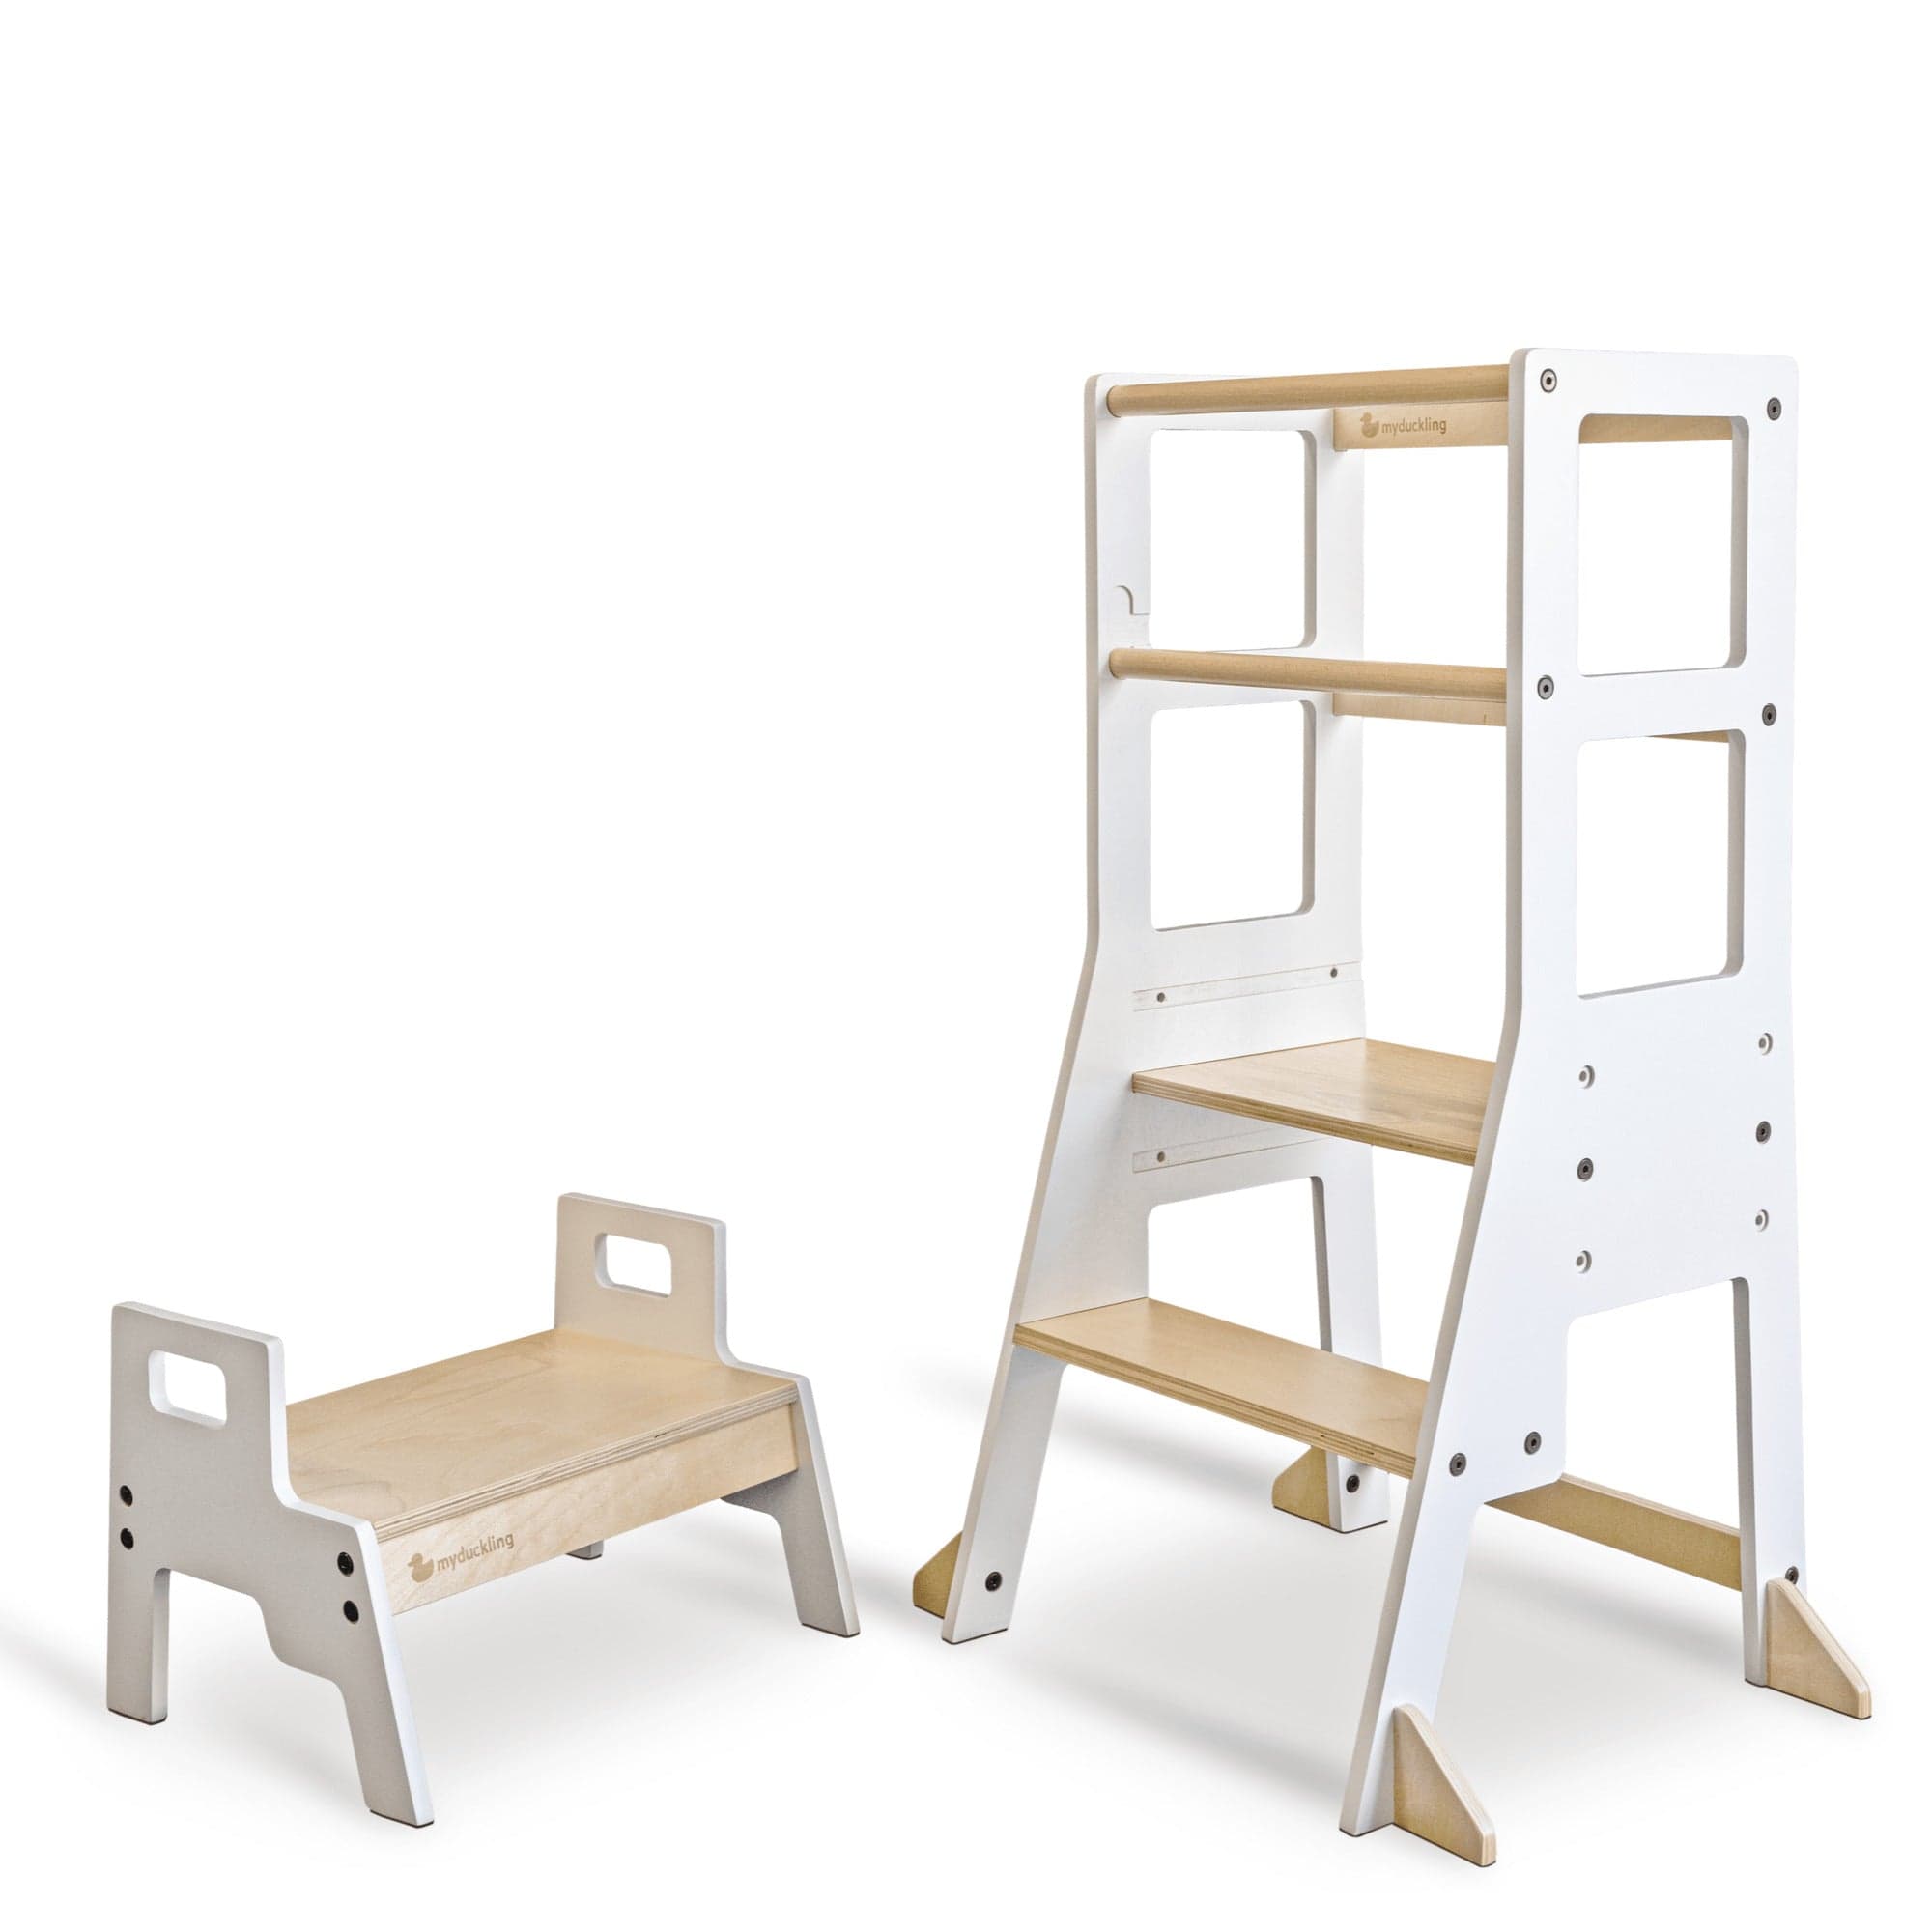 My Duckling JALA Deluxe Adjustable Learning Tower - White/Natural